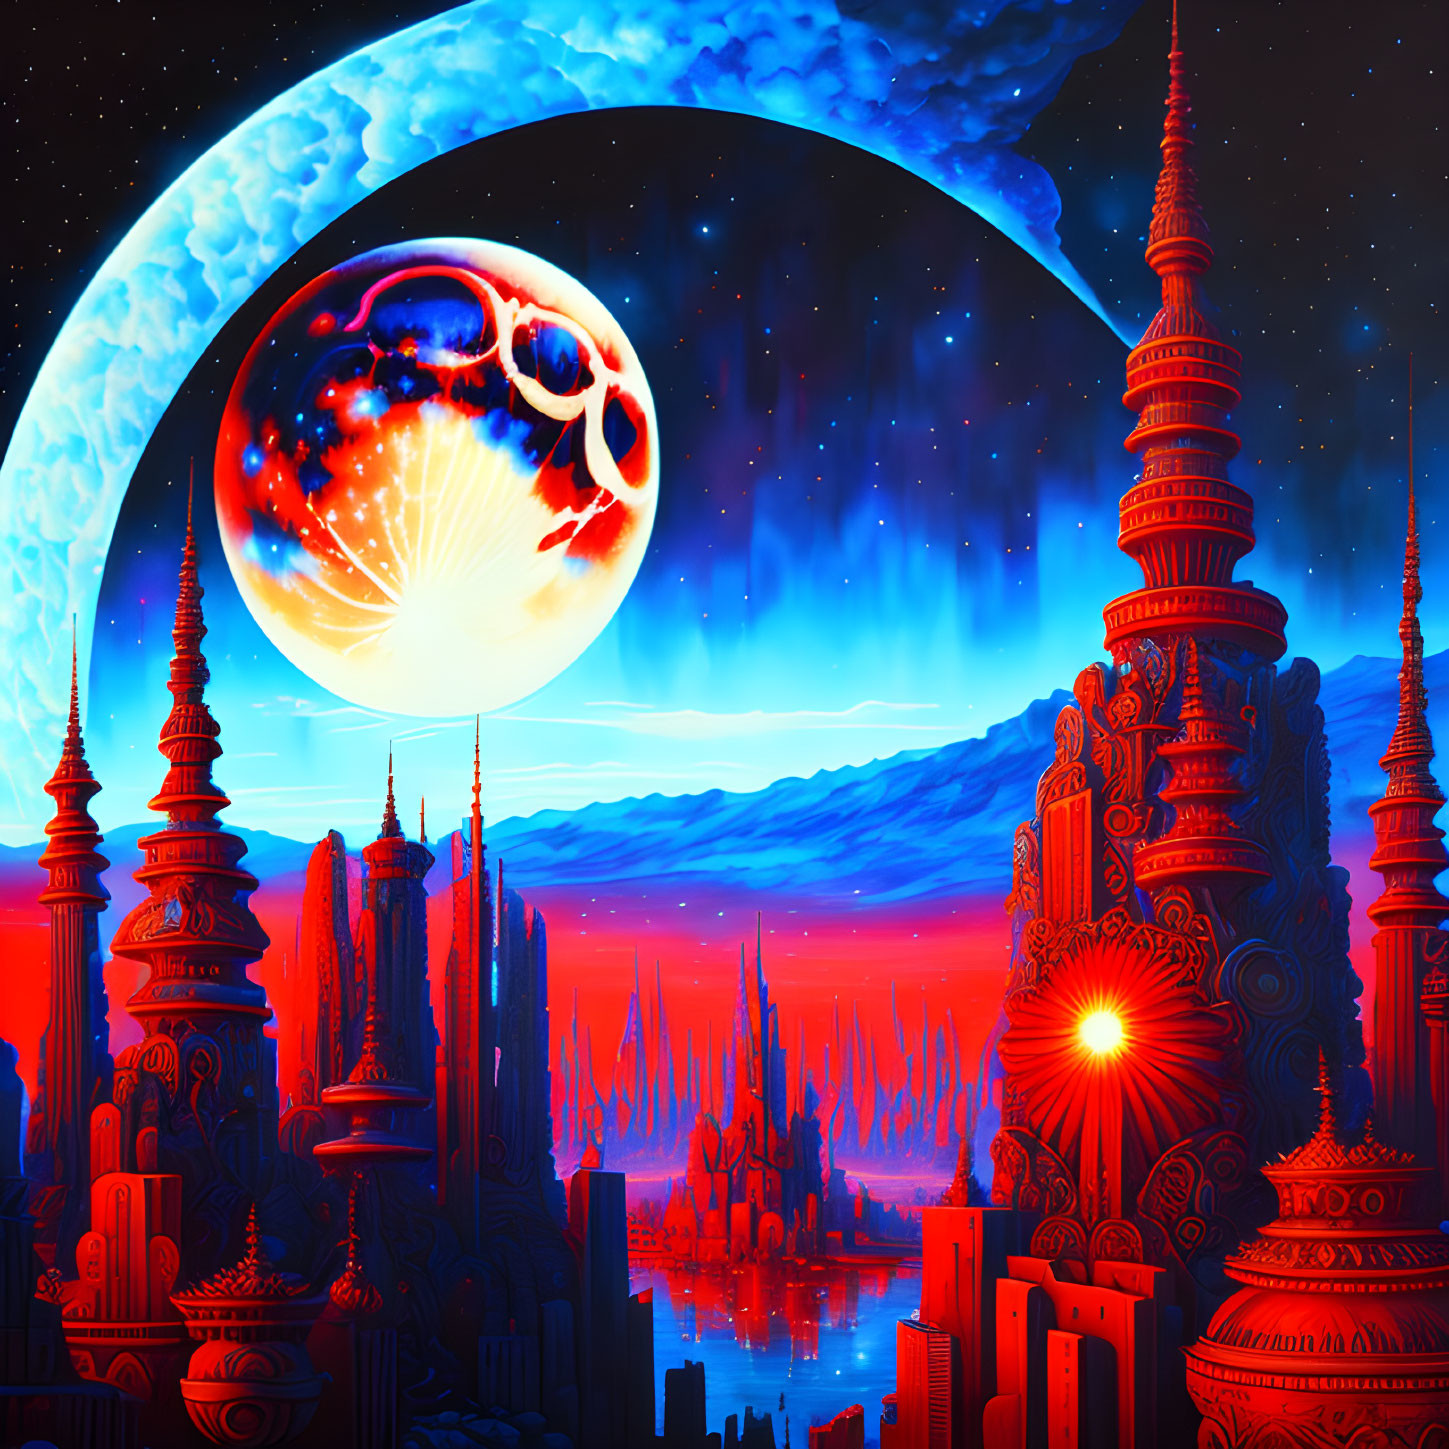 Futuristic sci-fi cityscape with towering spires under a large moon